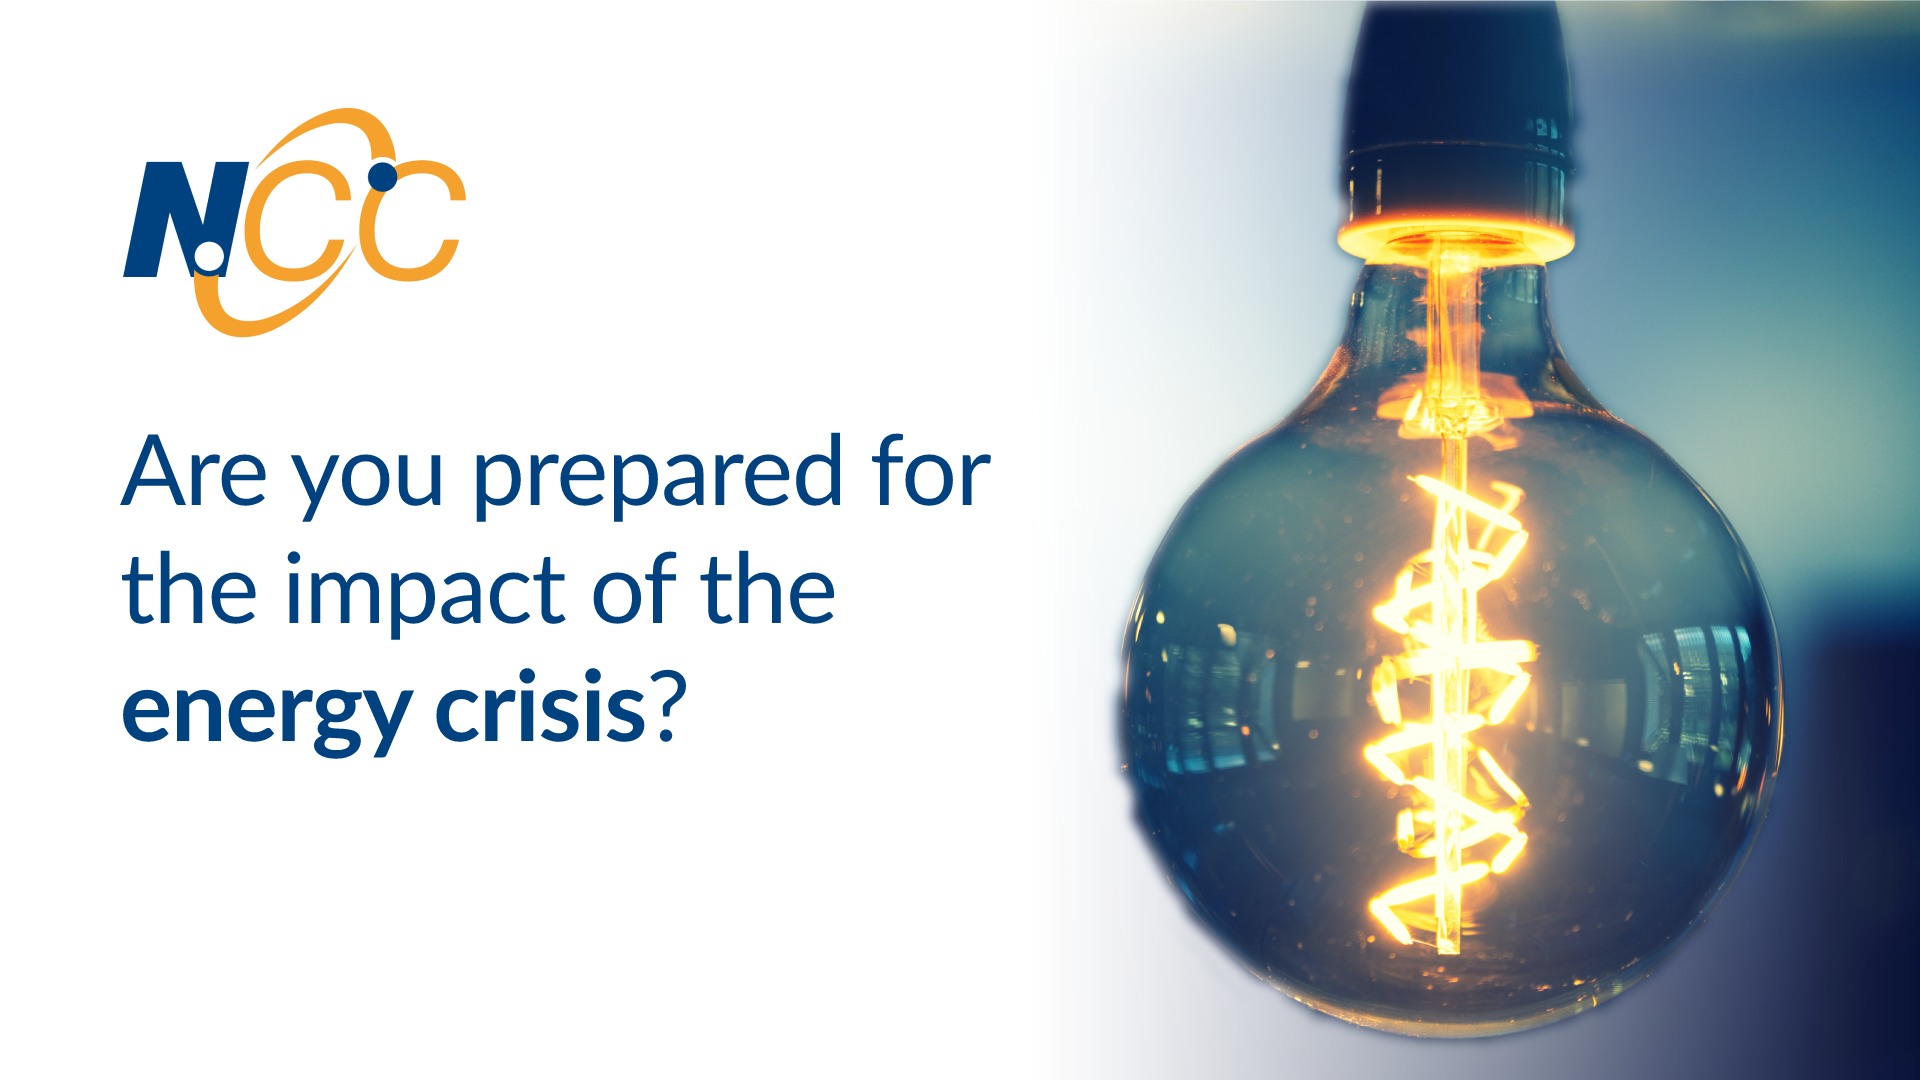 Are you prepared for the impact of the energy crisis